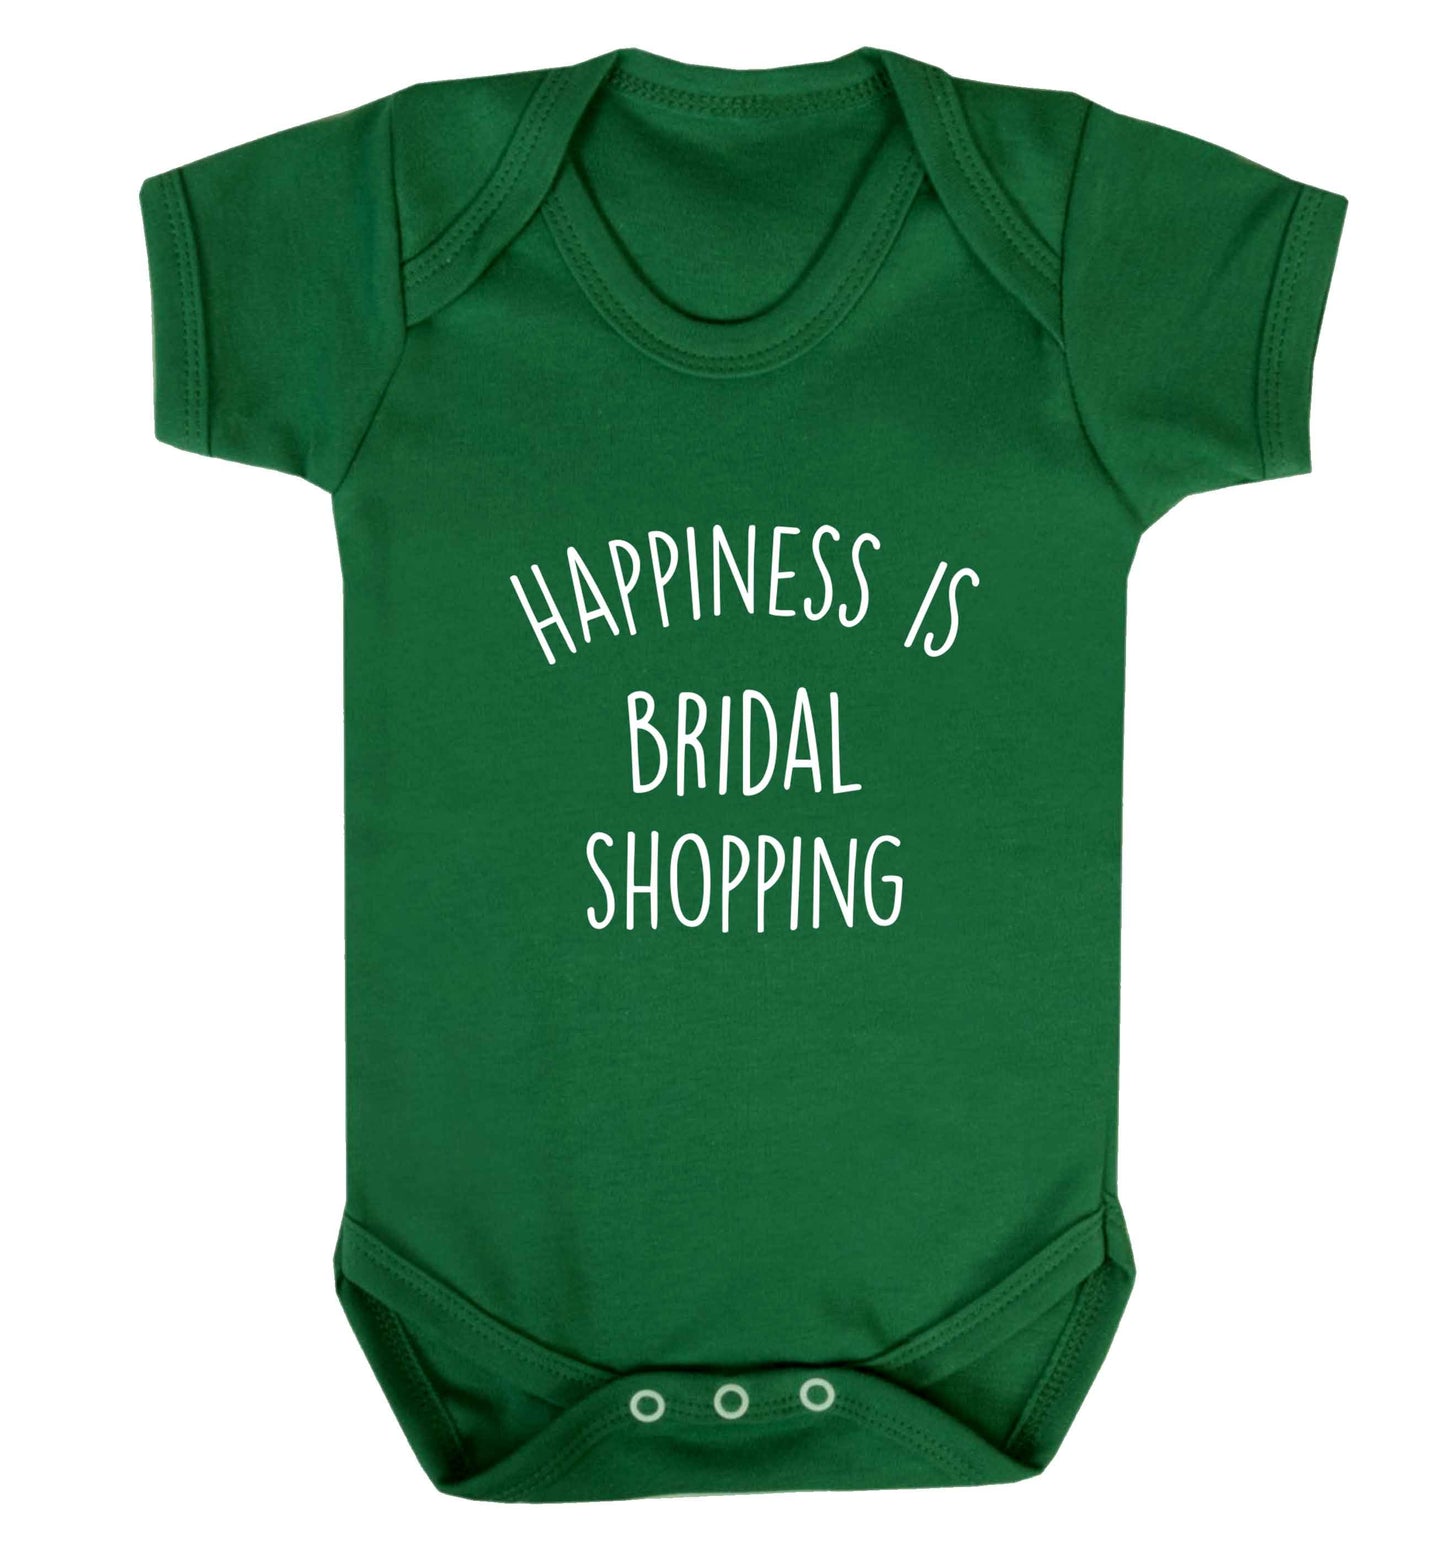 Happiness is bridal shopping baby vest green 18-24 months